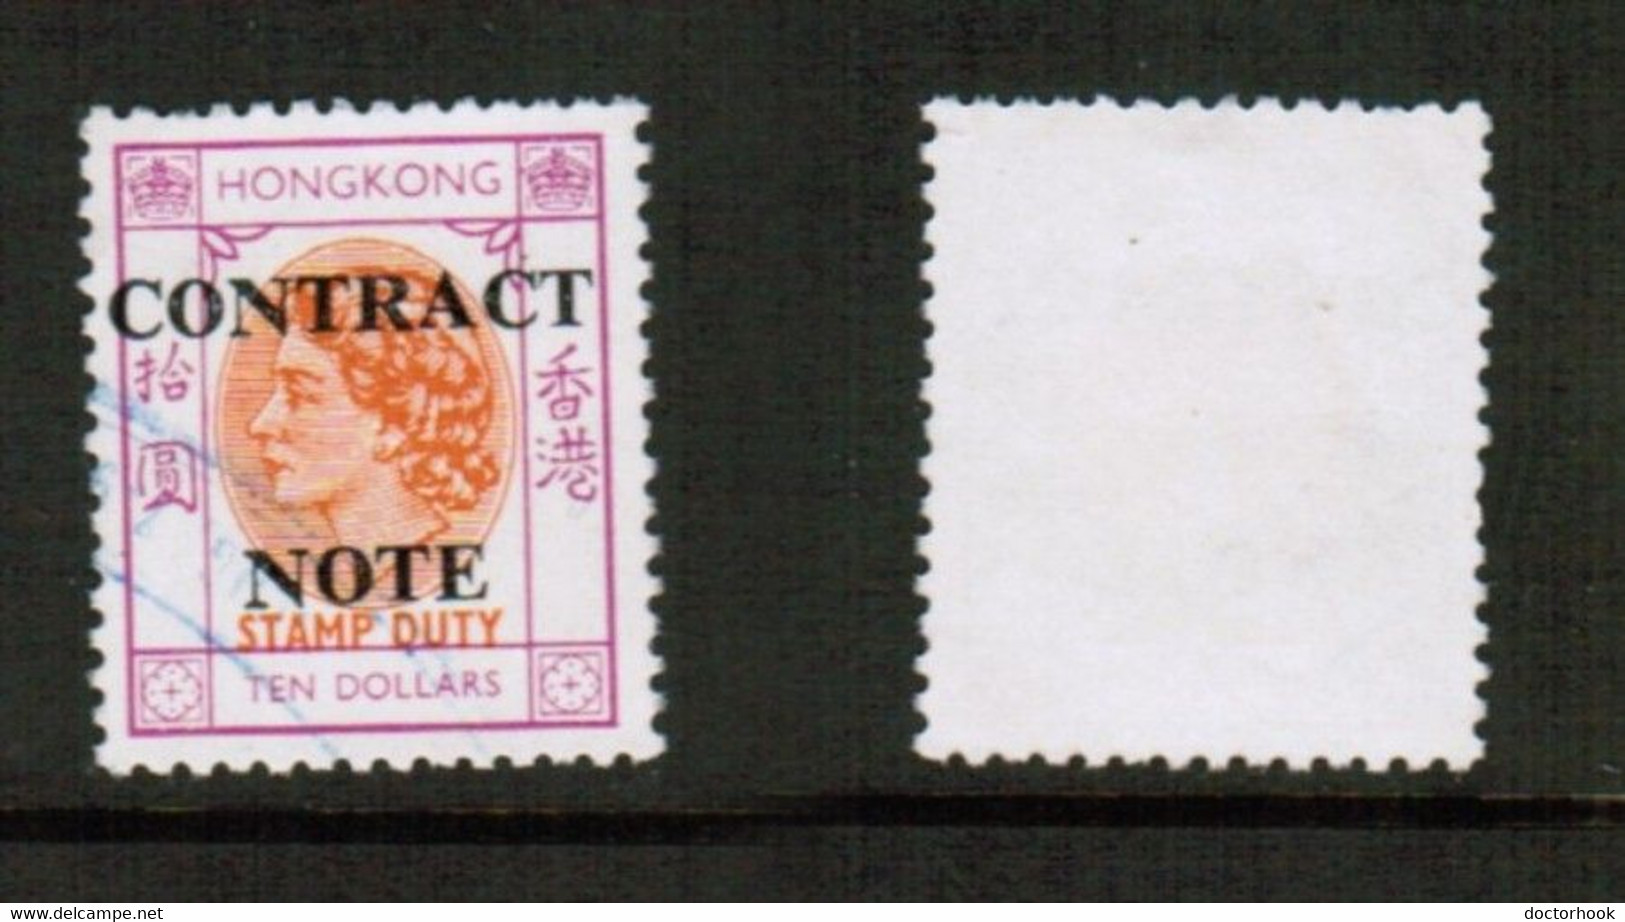 HONG KONG   $10.00 DOLLAR CONTRACT NOTE FISCAL USED (CONDITION AS PER SCAN) (Stamp Scan # 828-17) - Postal Fiscal Stamps